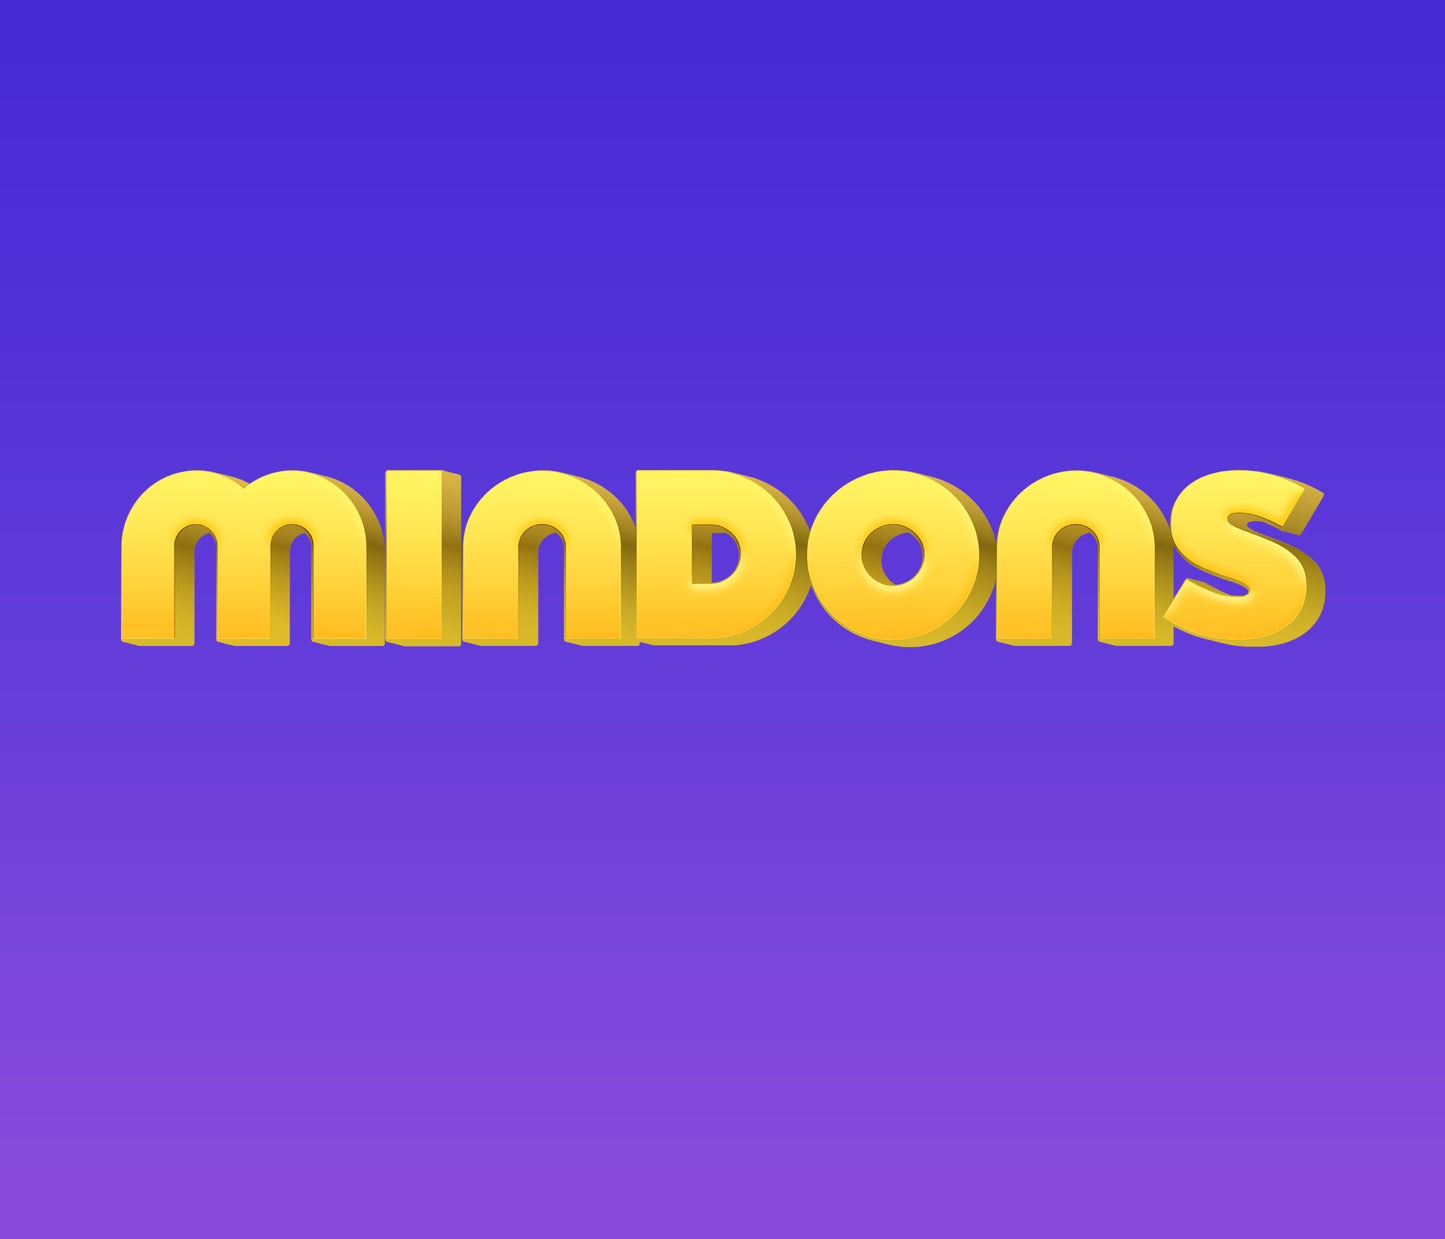 Minions Yellow Textured Font